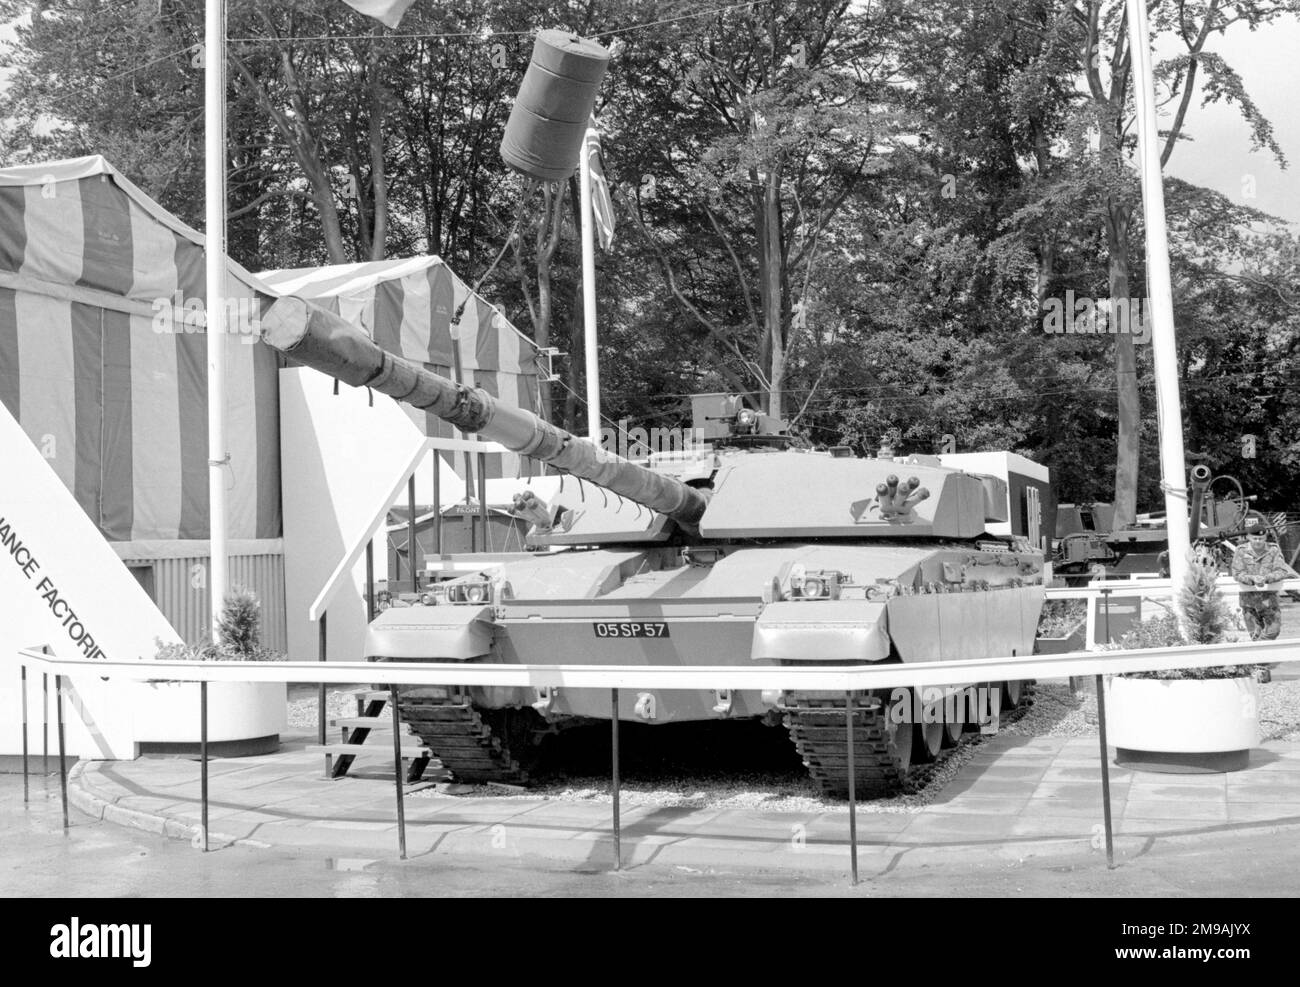 A Challenger 1 tank derivative with modified turret and equipment, at the British Army Equipment Exhibition, held at Aldershot from 23-27 June 1980. Stock Photo